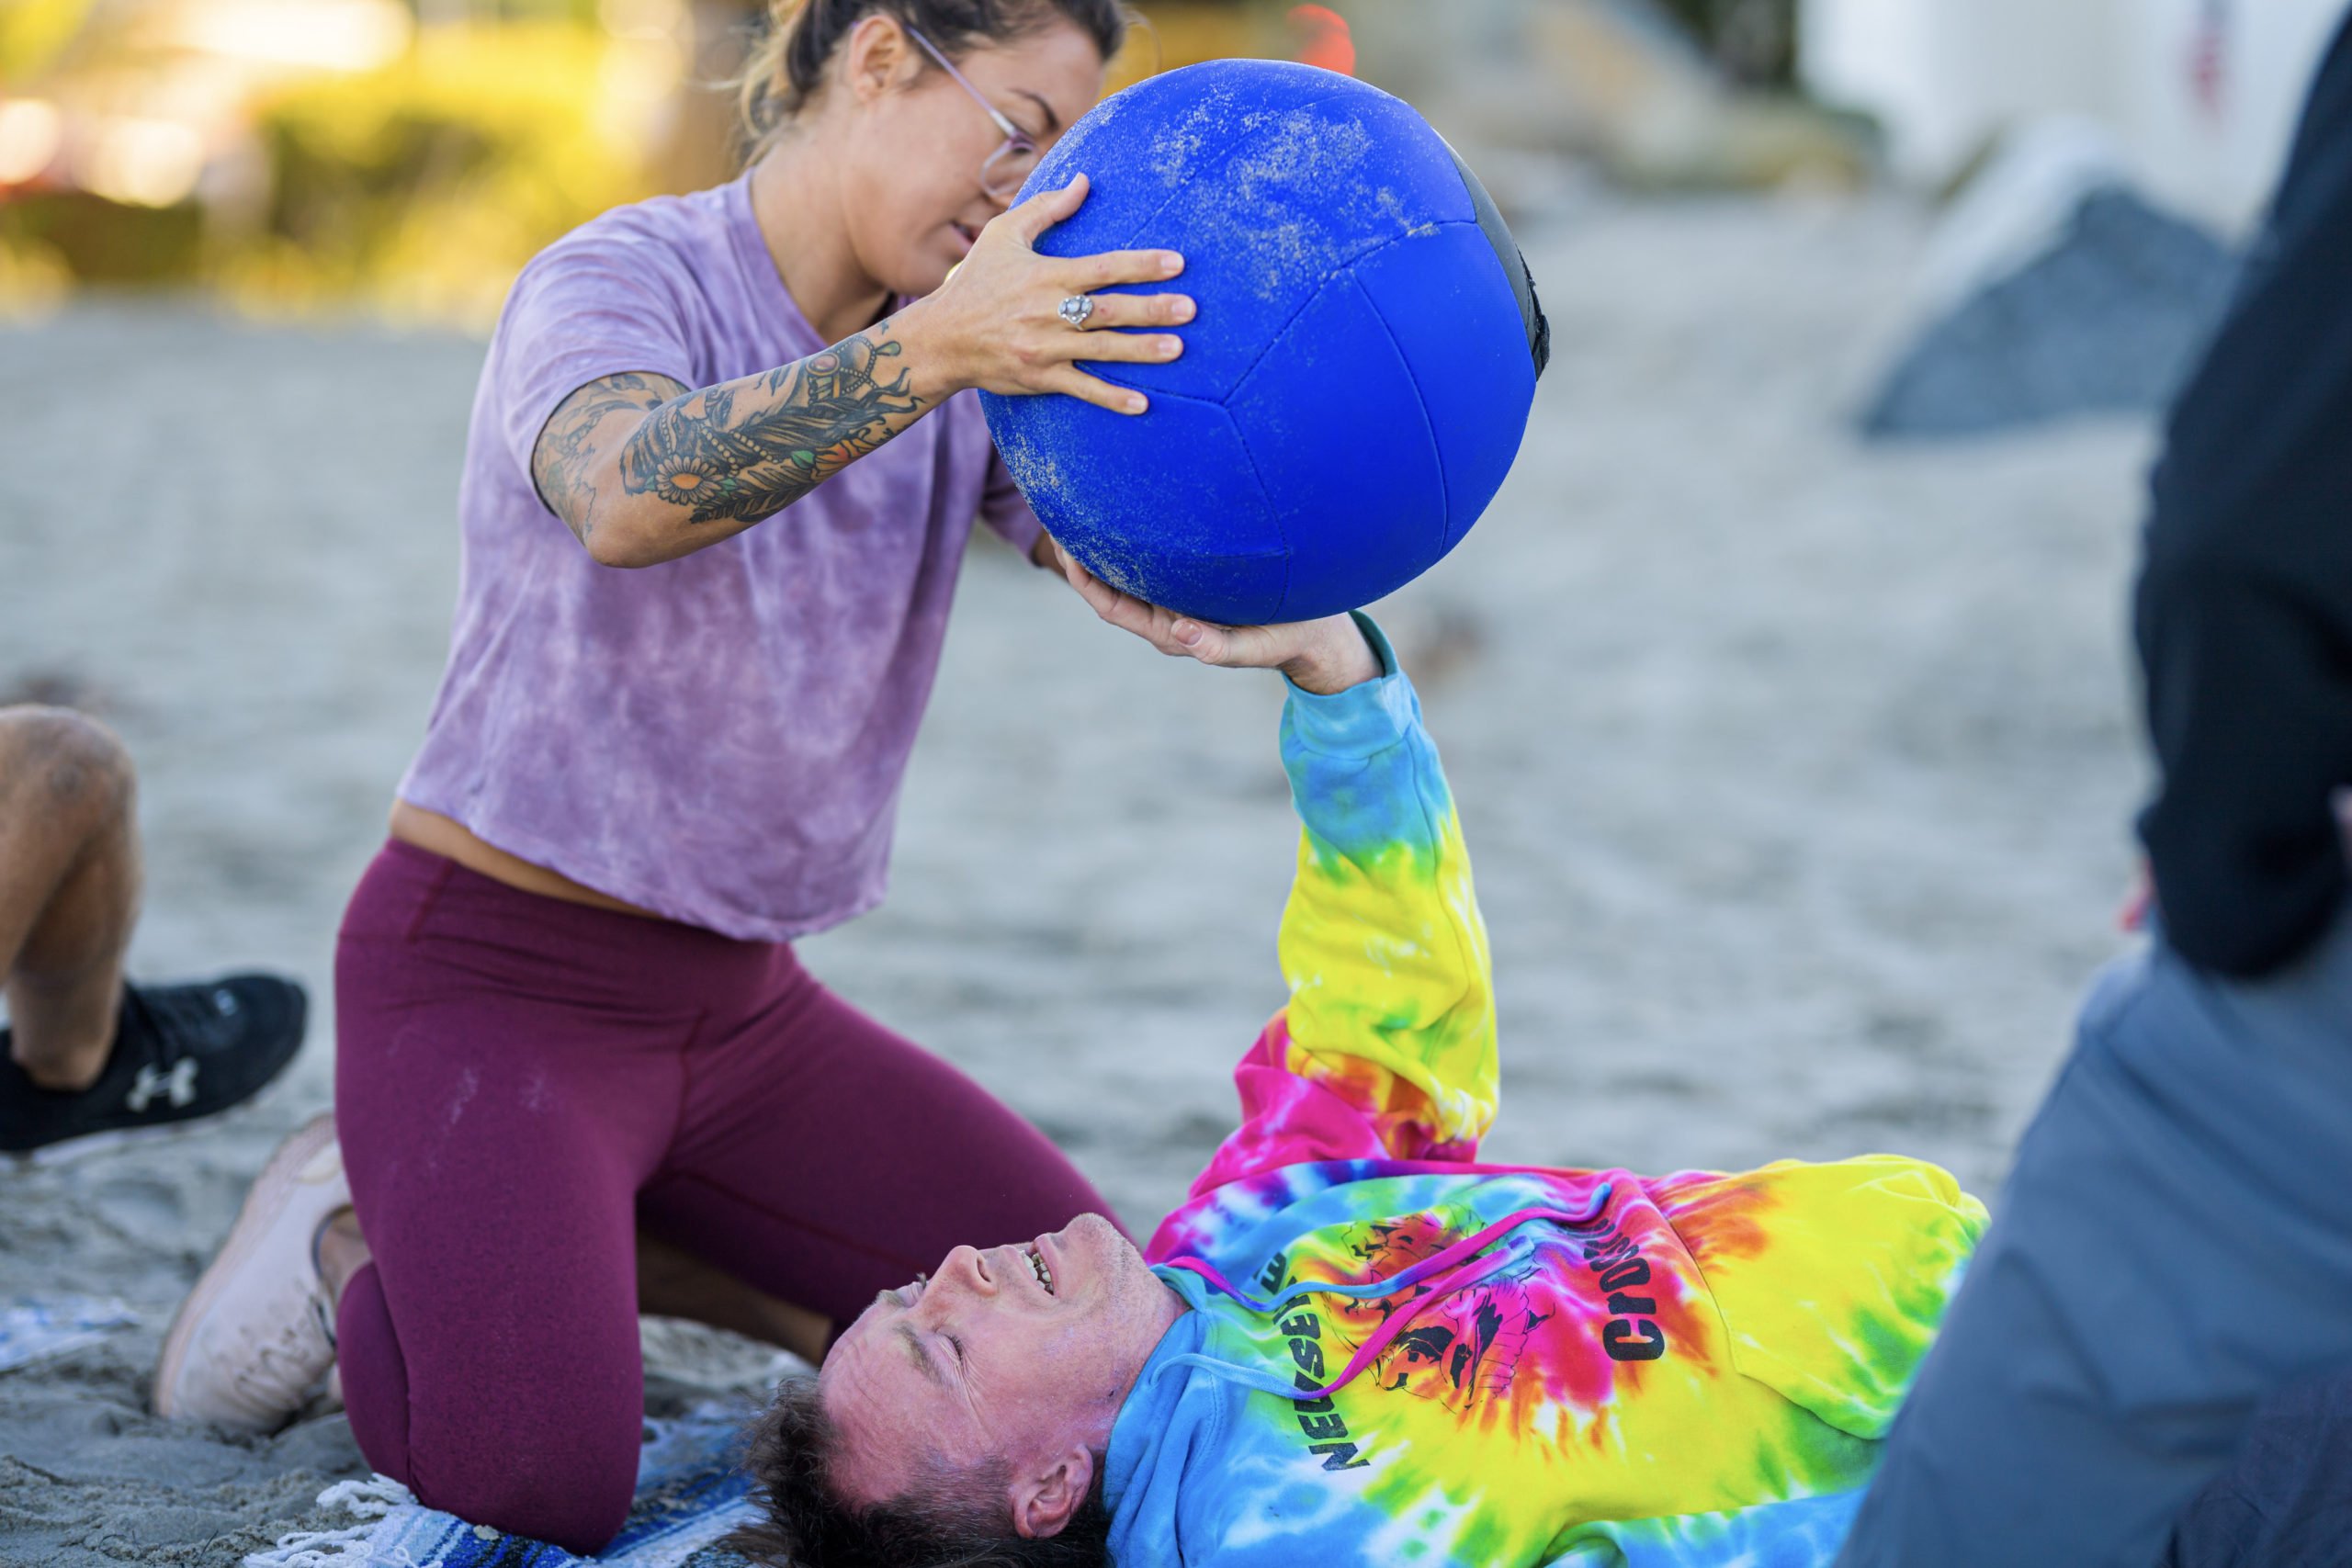 During a morning workout on the beach, Shane attempts the challenge of lifting a medicine ball with his one arm while laying on a beach towel.